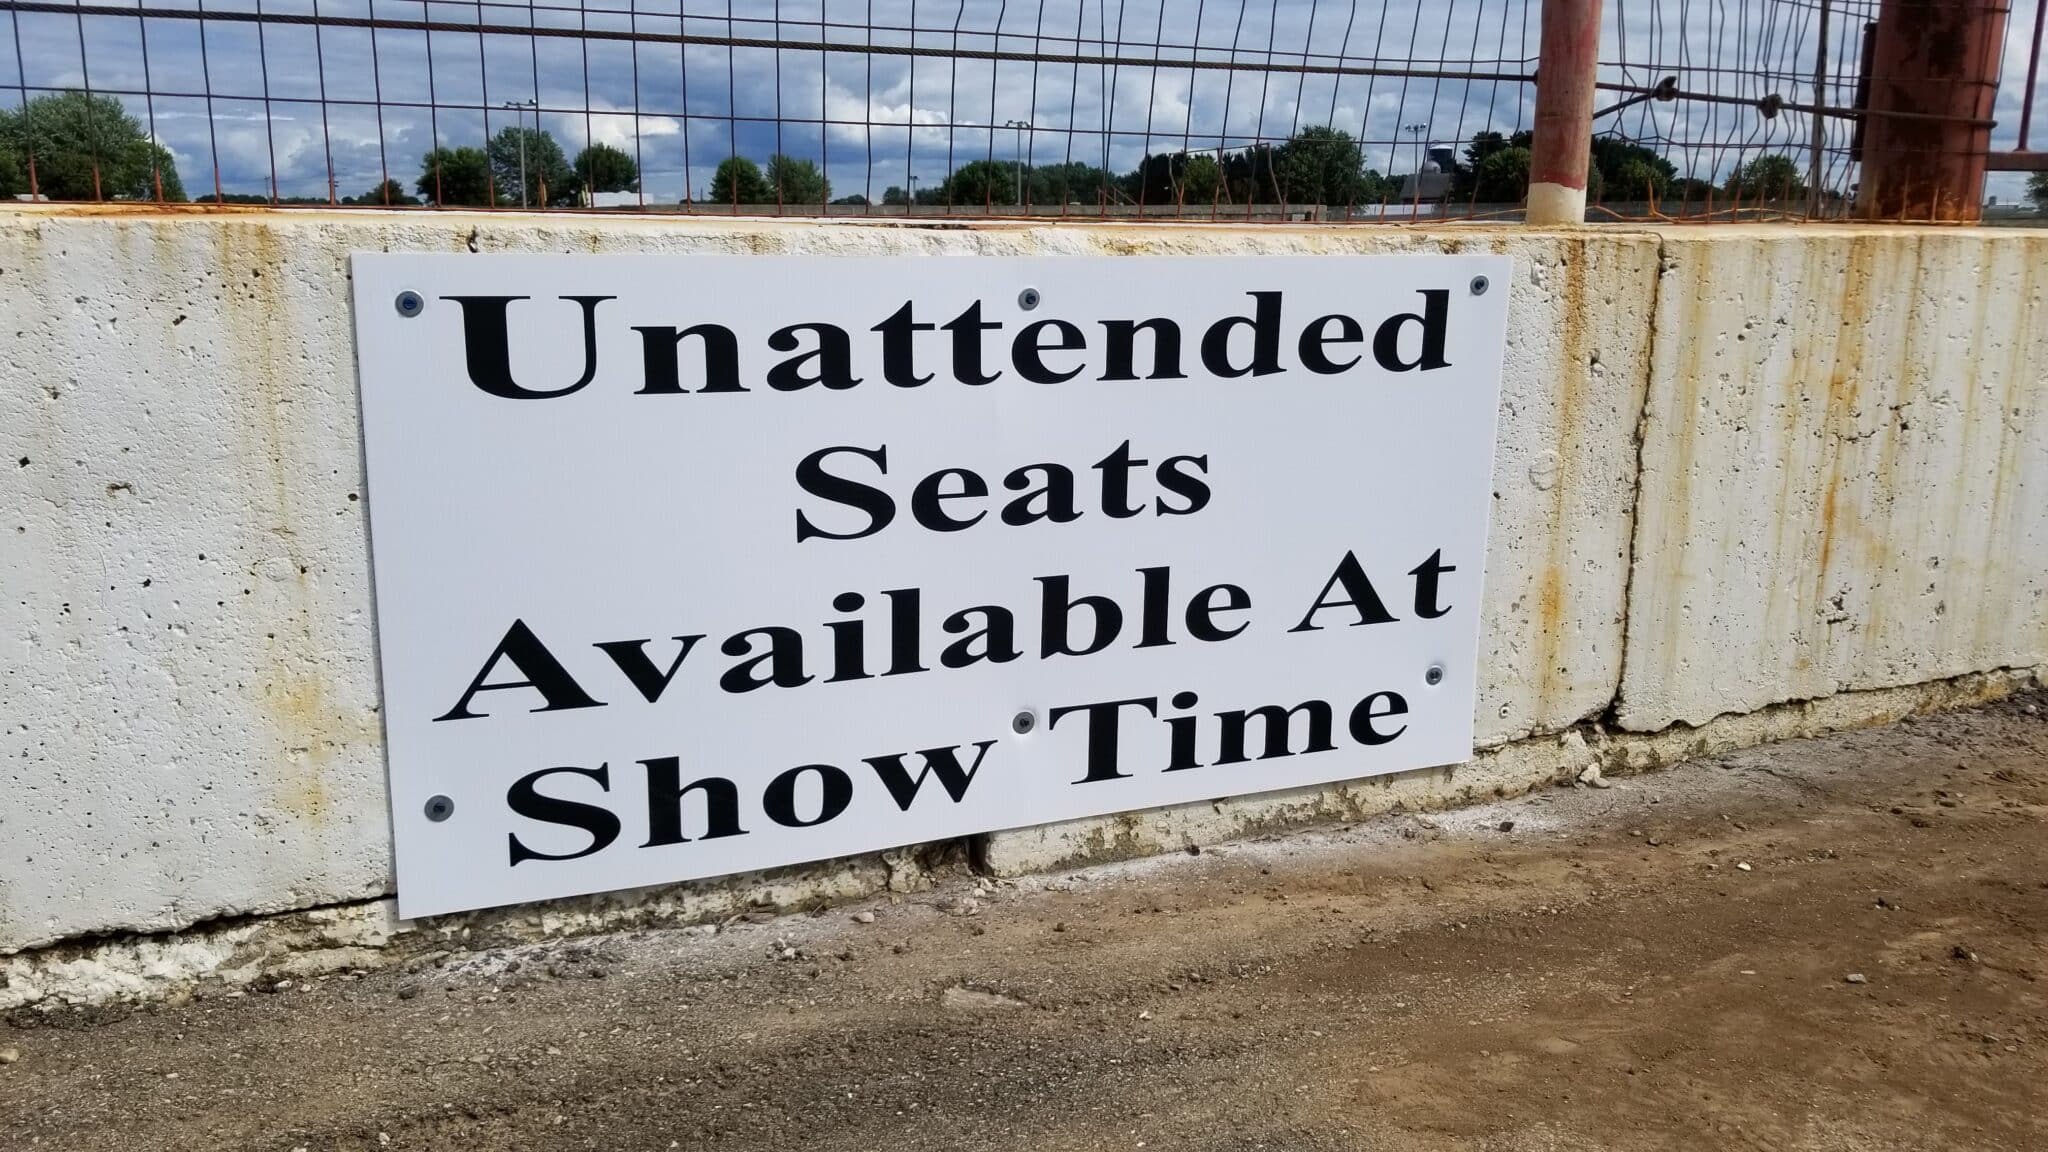 Unattended Seats Available at Show Time Large Signs